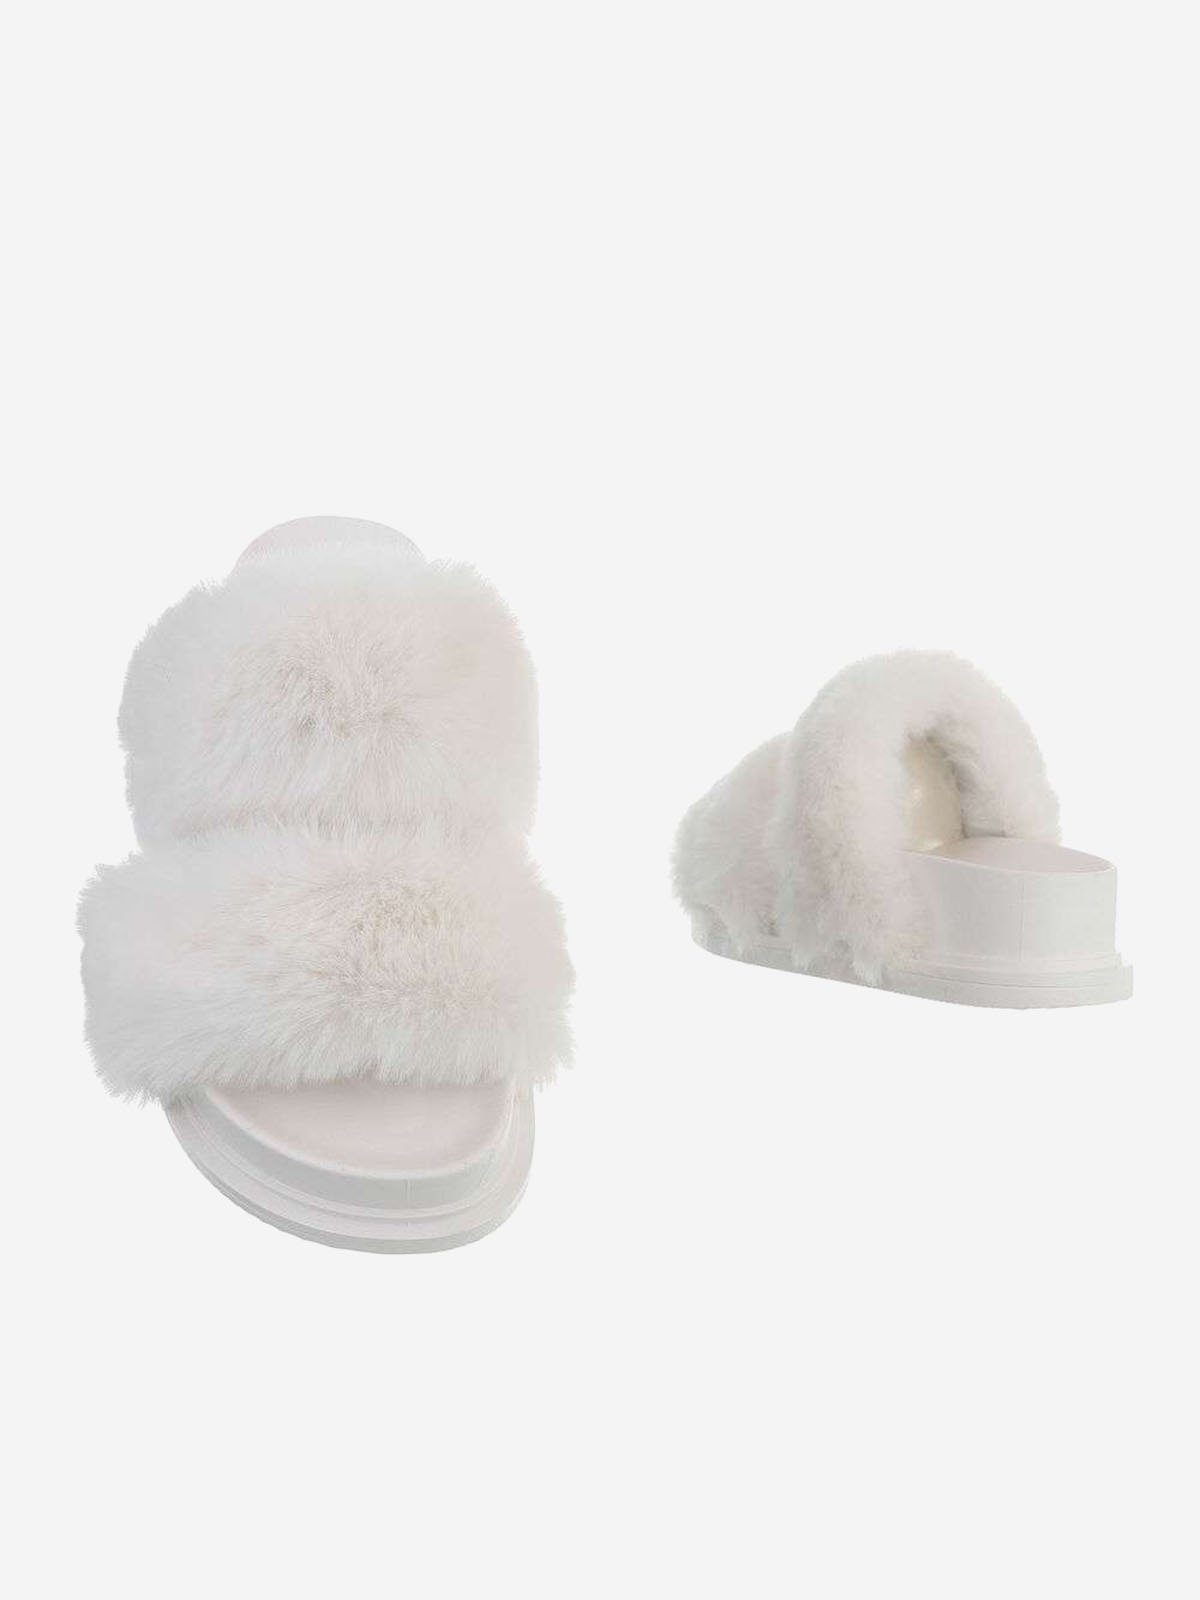 Women's slippers with fur in white